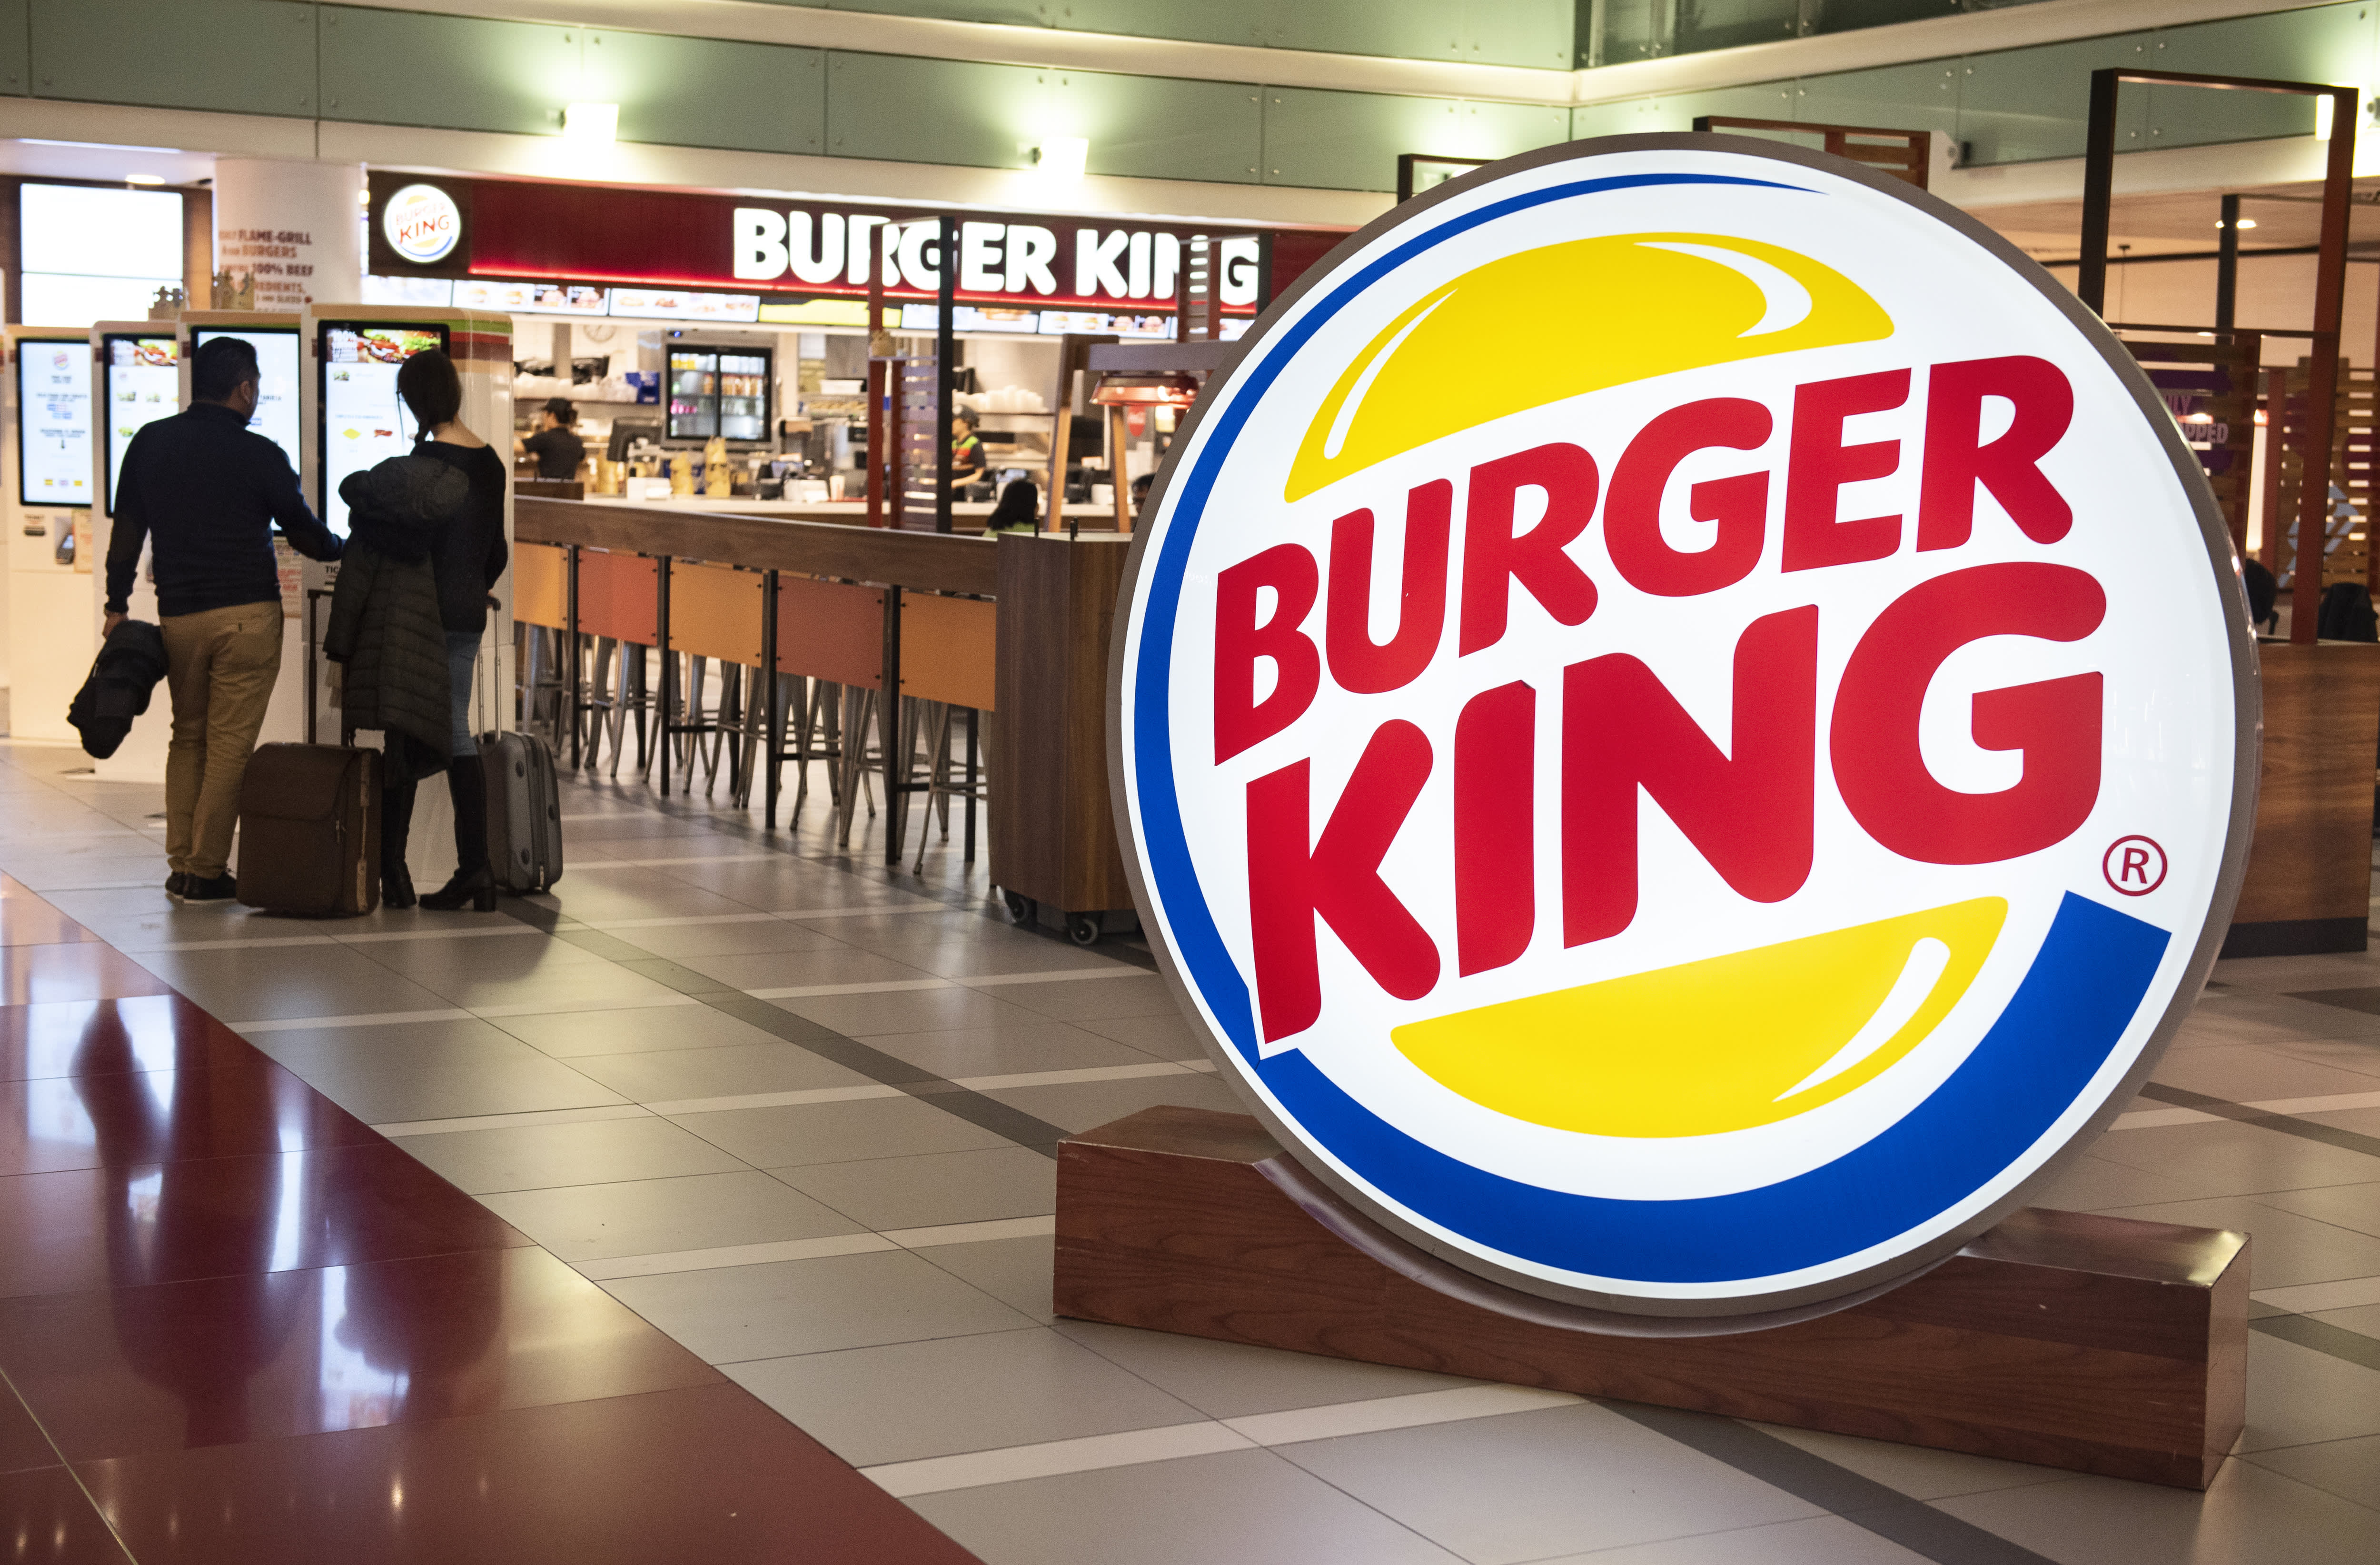 A Burger King franchisee made a discounting error that cost it millions